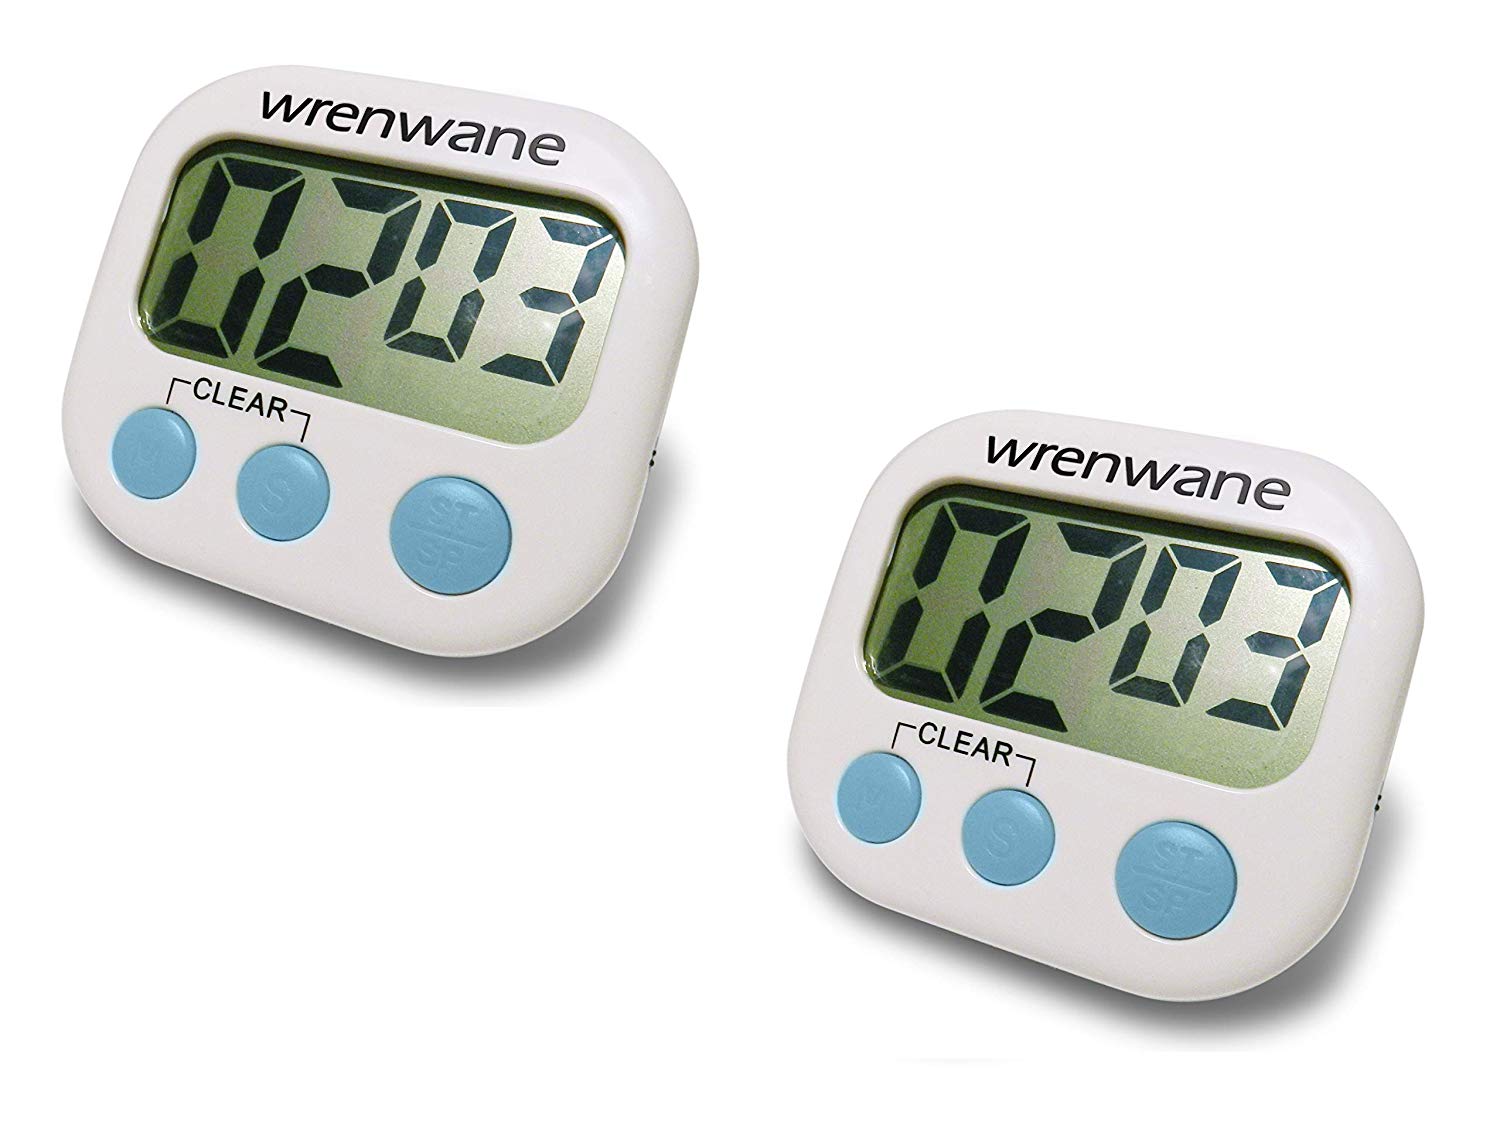 Wrenwane Digital Kitchen Timer (Upgraded), No Frills, Simple Operation, Big Digits, Loud Alarm, Magnetic Backing, Stand, White (Pack of 2)